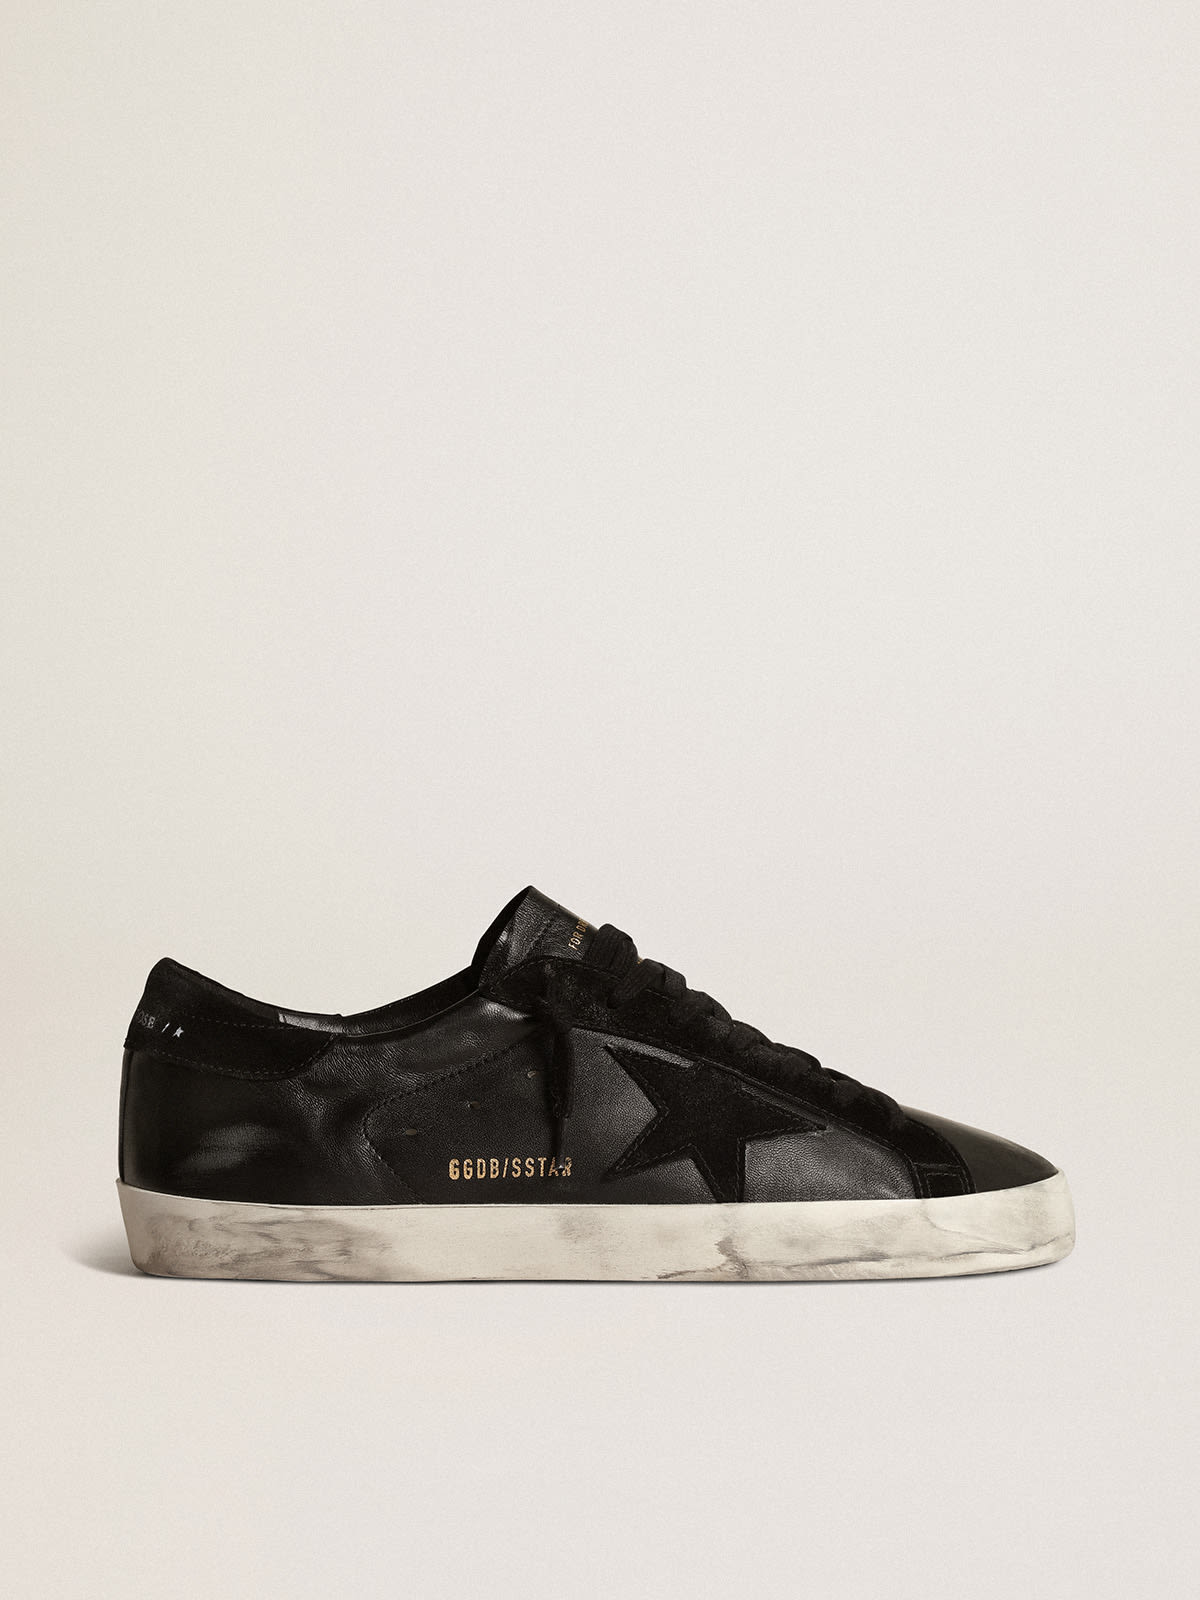 Golden Goose - Men's Super-Star in black nappa with black suede star and heel tab in 